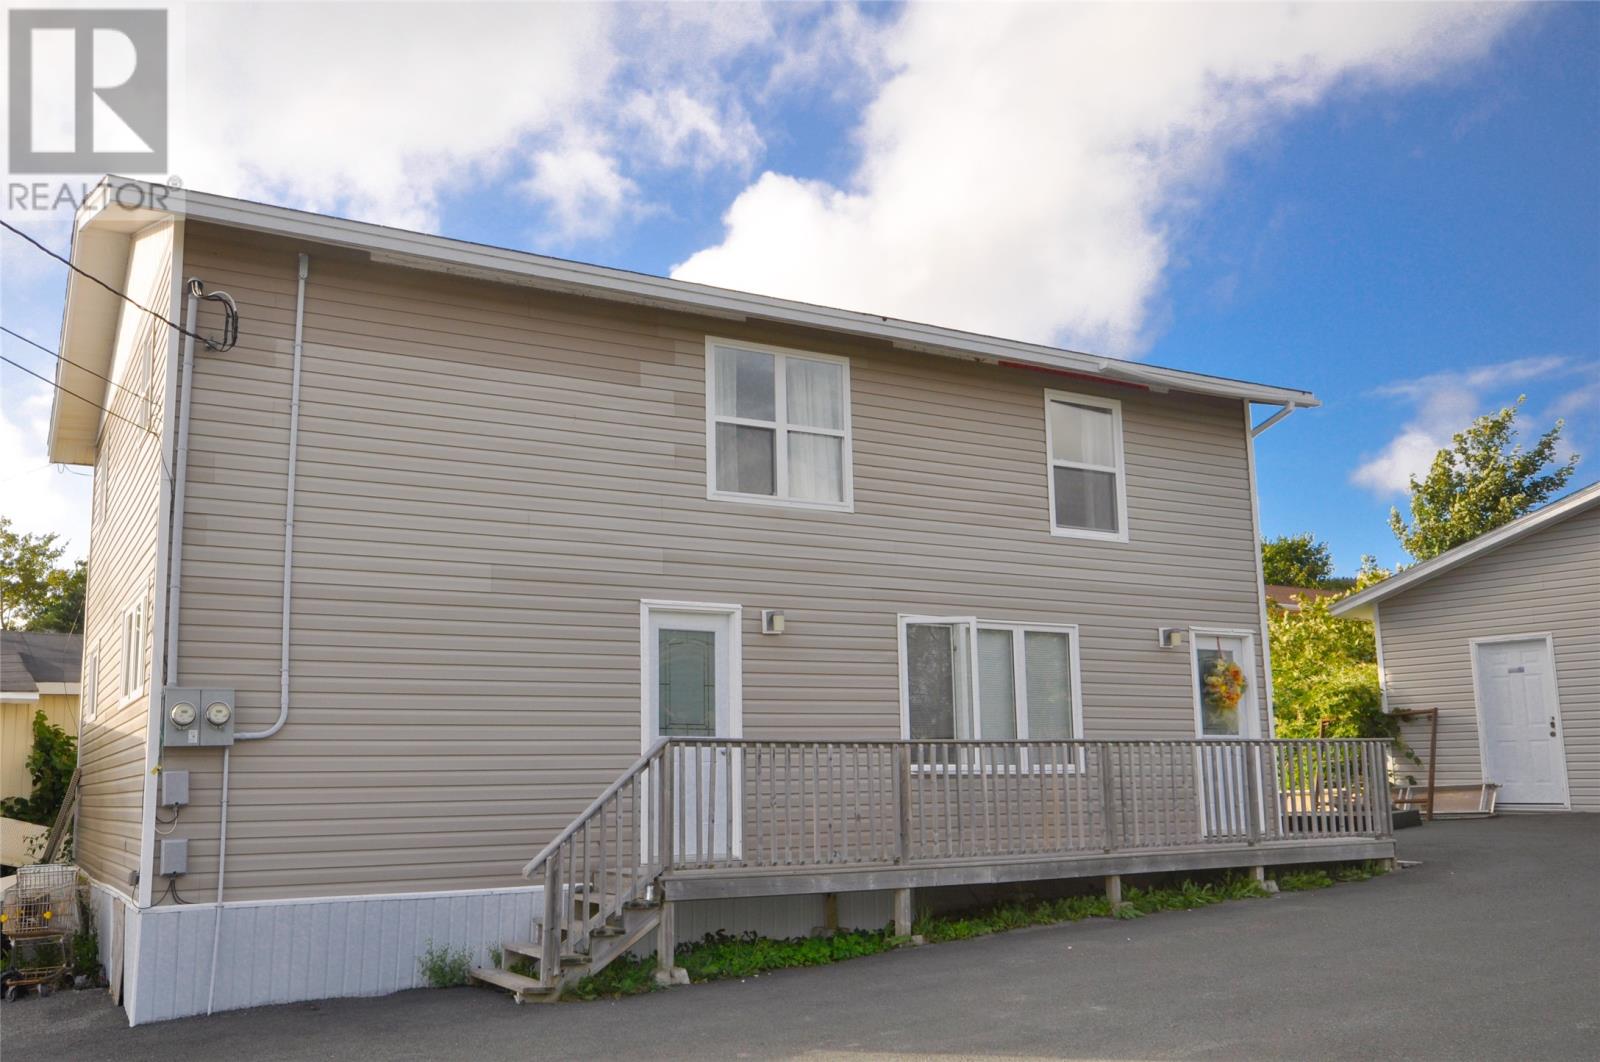 1055-58 Main Road, Dunville - Placentia, A0B1S0, 5 Bedrooms Bedrooms, ,2 BathroomsBathrooms,Single Family,For sale,Main,1268402